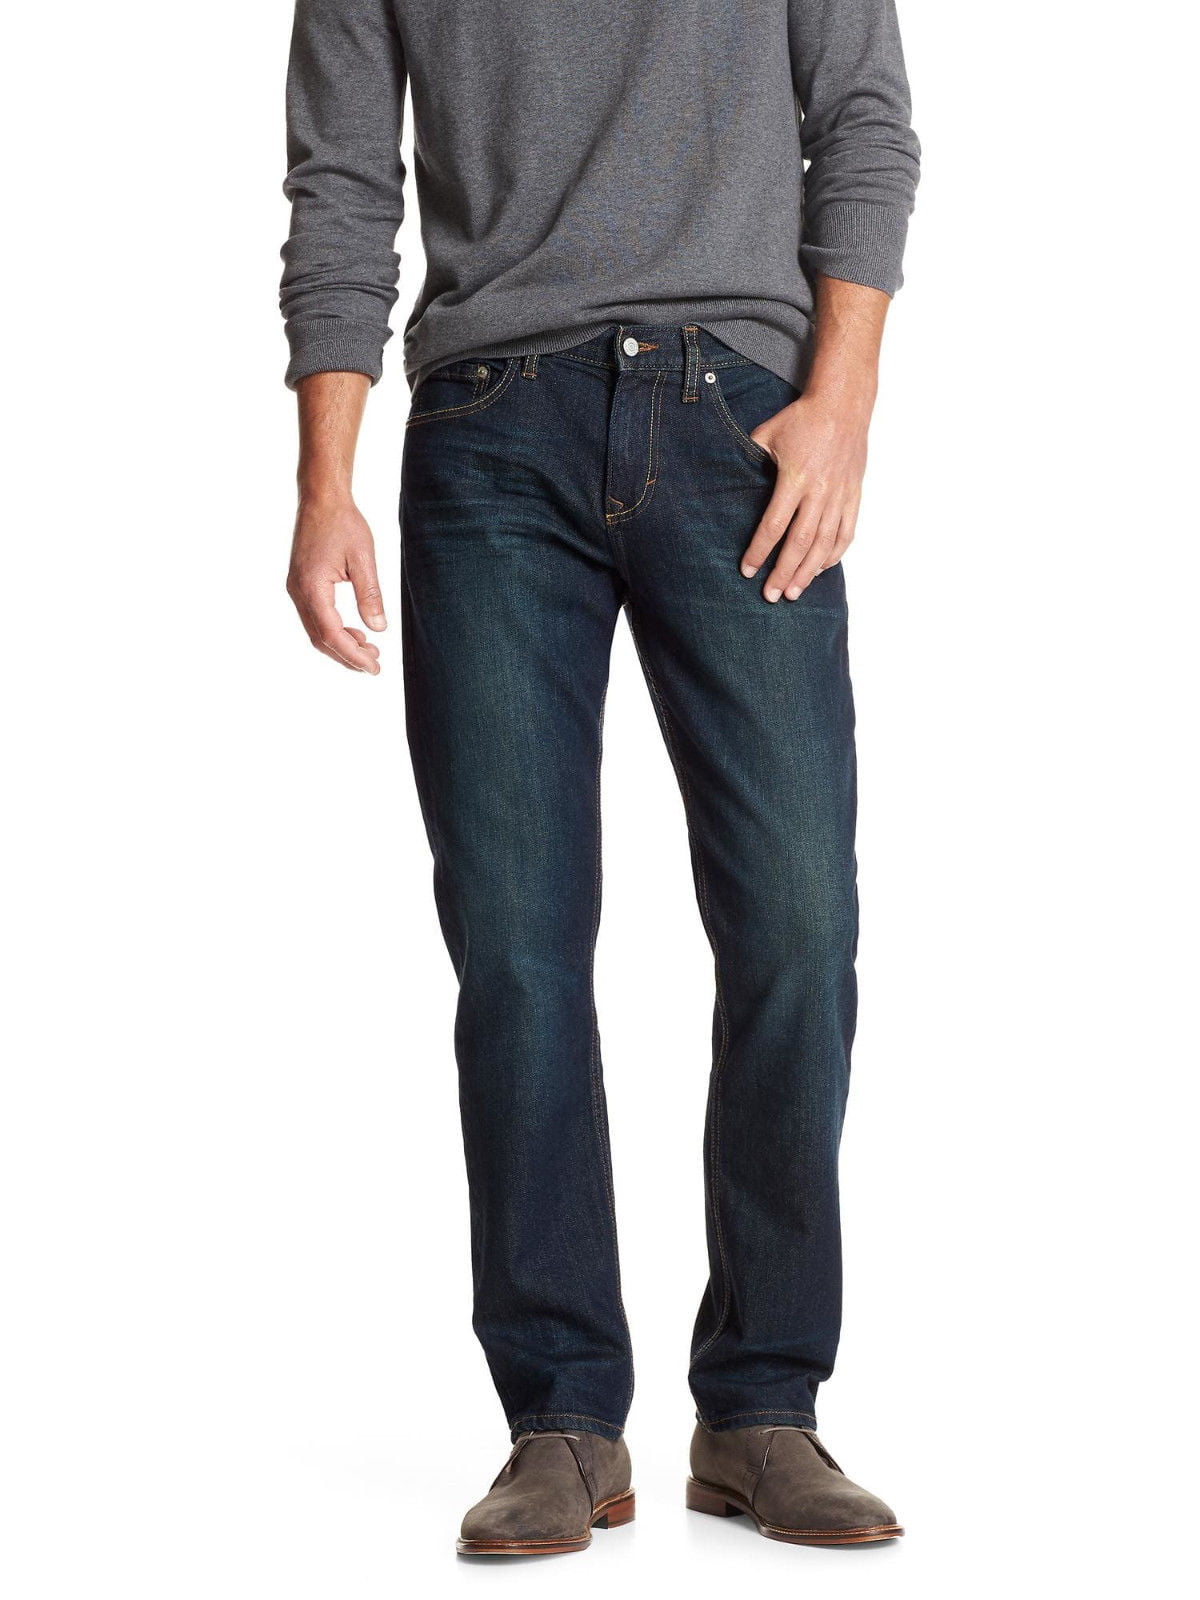 New 5002-3 Banana Republic Mens Dark Blue Wash Athletic Fit Relaxed ...